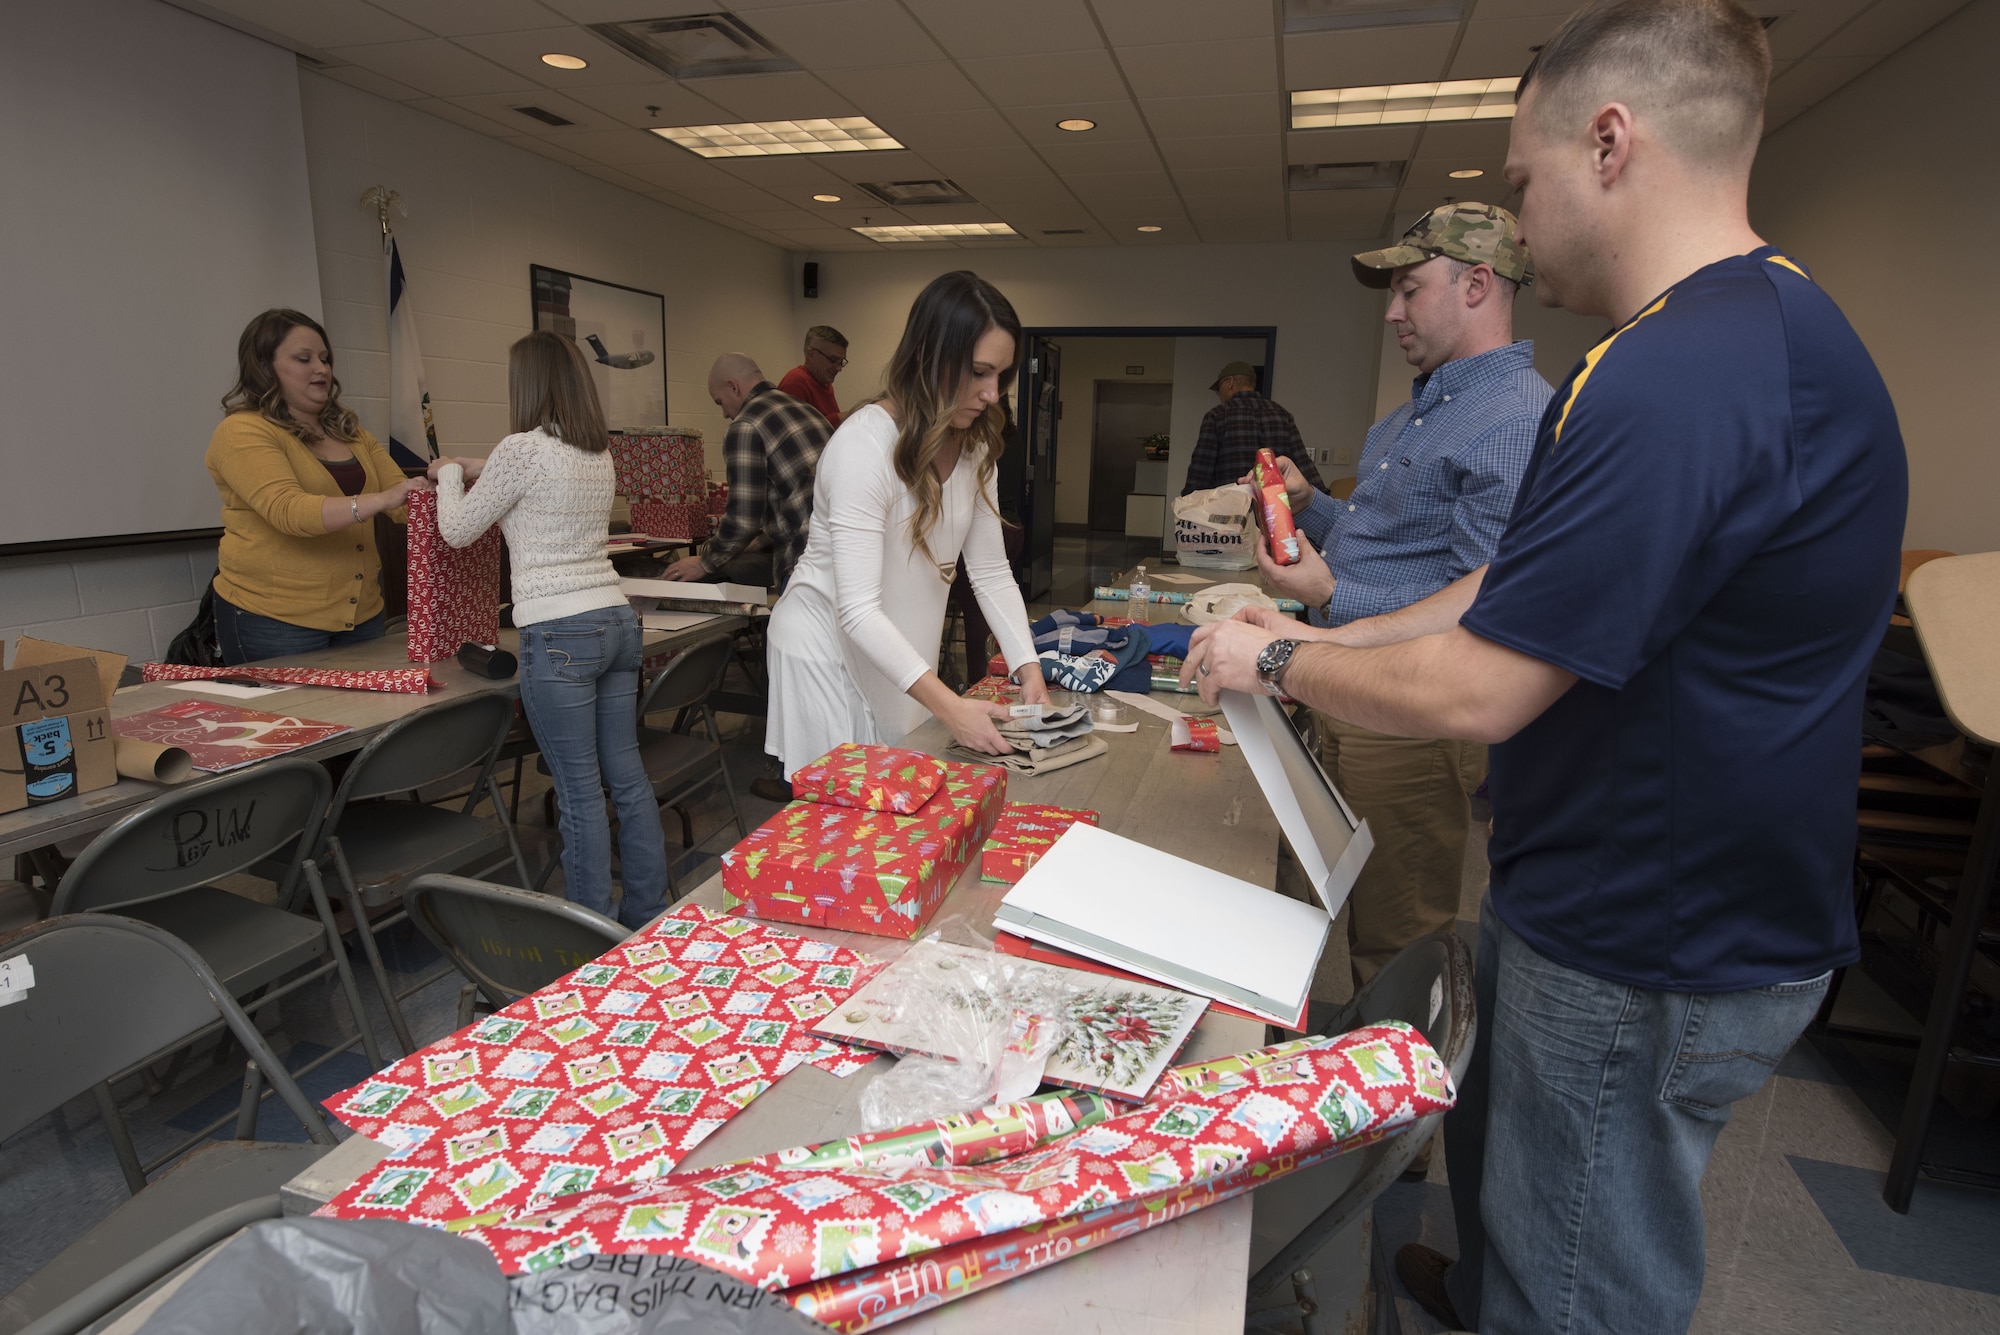 Members of the 167th Operations Group wrap and organize gifts for children in the tri-county area as part of the Ops Adopts program headed up by First Lt. Ryan Day, a pilot for the 167th Airlift Wing, at far right in photo, in the Operations building at the 167th Airlift Wing, Martinsburg, W.Va., Dec. 15. (U.S. Air National Guard photo by Senior Master Sgt. Emily Beightol-Deyerle)